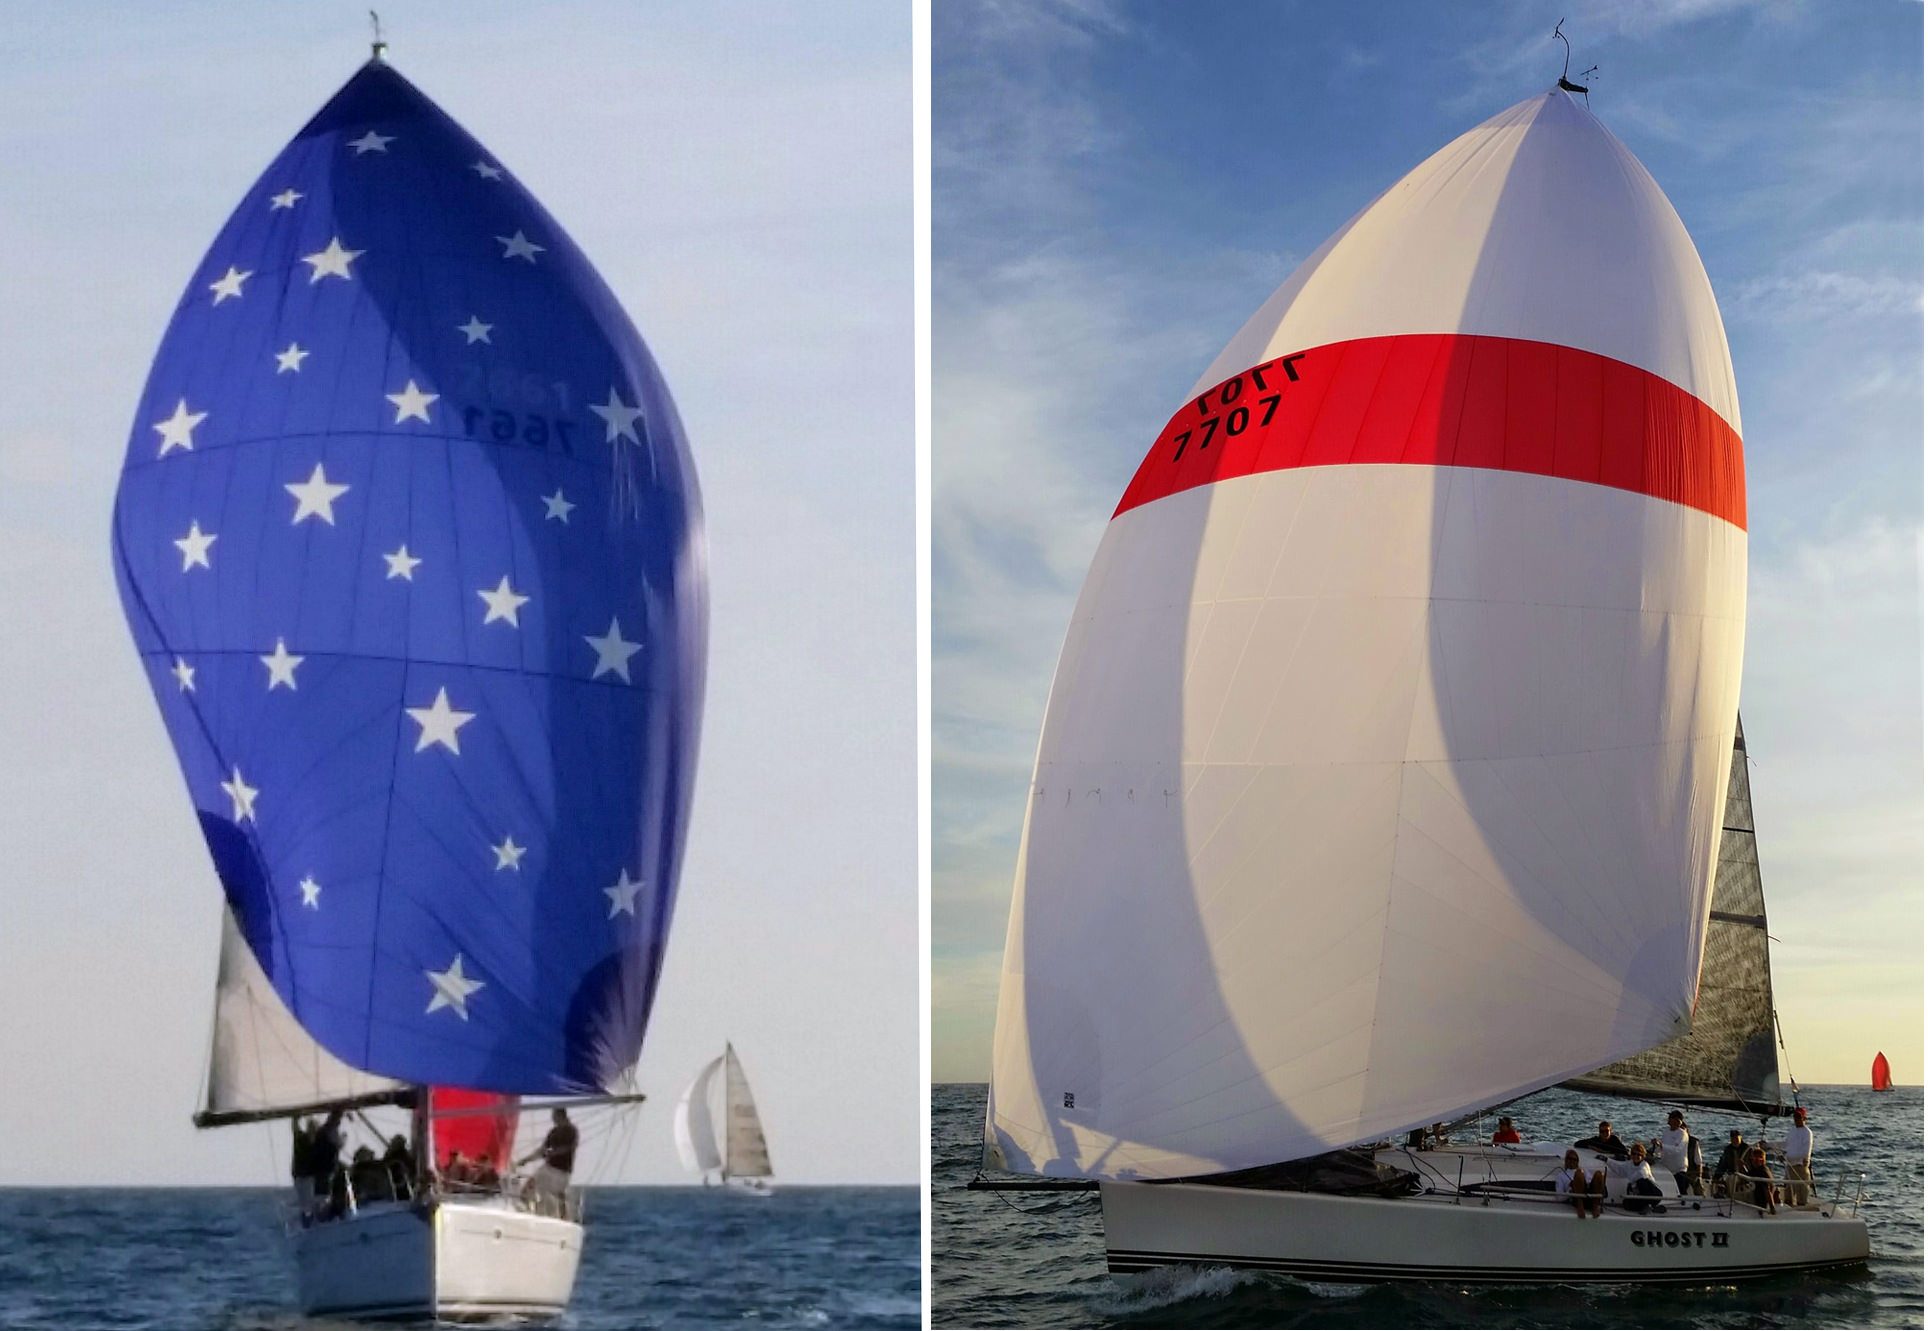 Left:&nbsp;Whitney Green's Jeanneau 43 PACIFIC finished 1st in class in the 2016 Pacific Cup with a complete UK Sailmakers inventory. Right: Al Berg's Farr 395 GHOST II&nbsp;finished 1st in class in the 2016 Berger Series, also with a complete UK in…